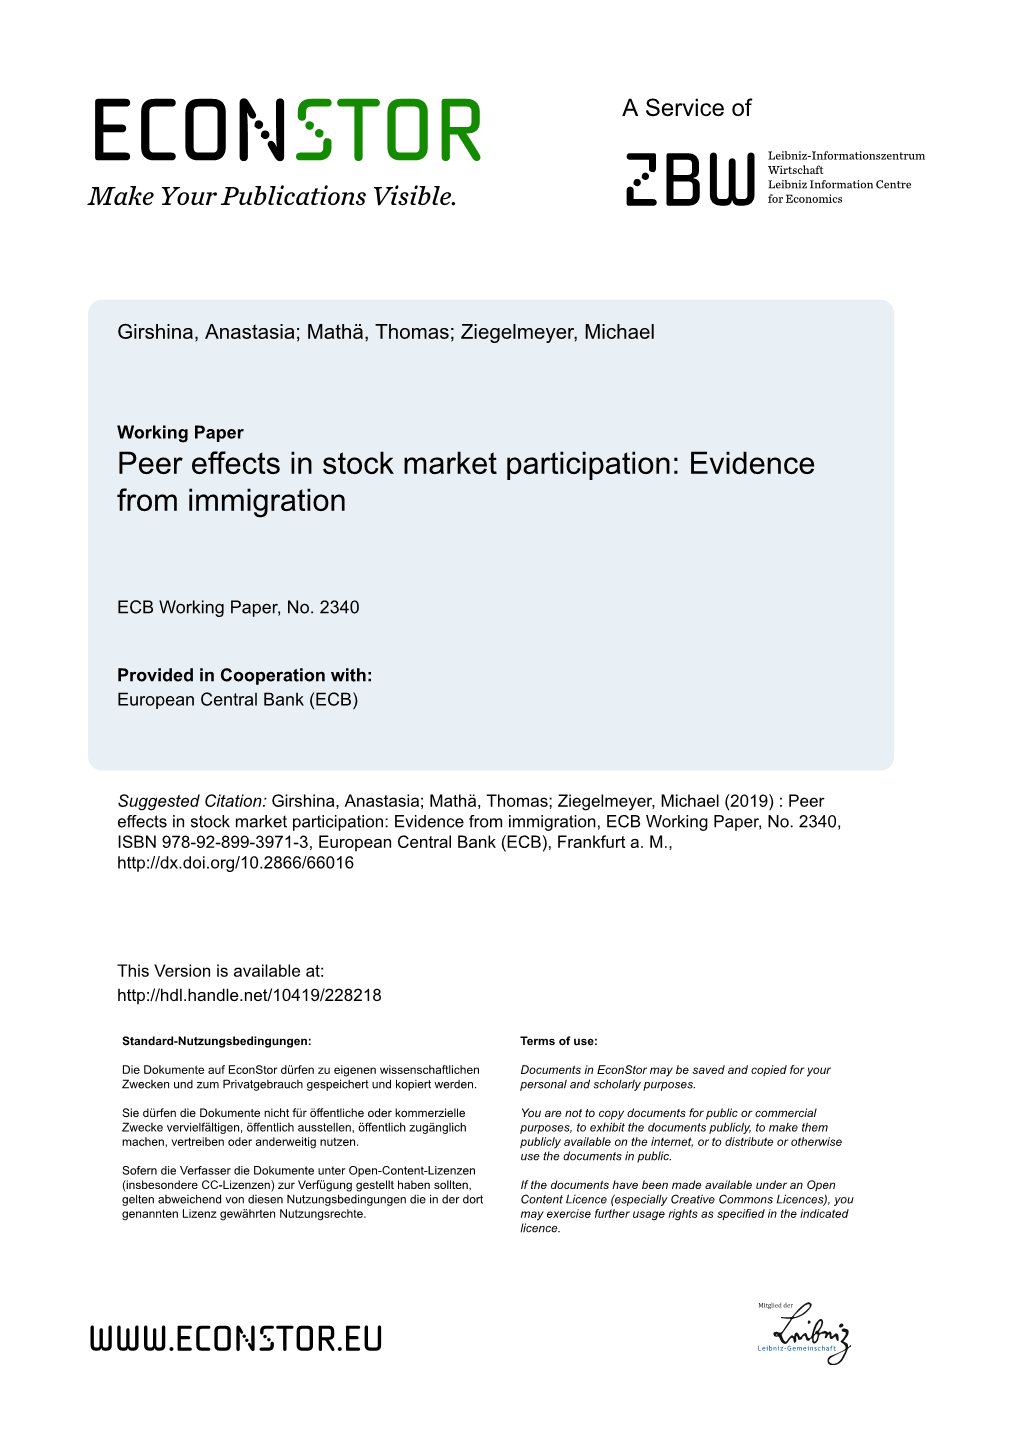 Peer Effects in Stock Market Participation: Evidence from Immigration